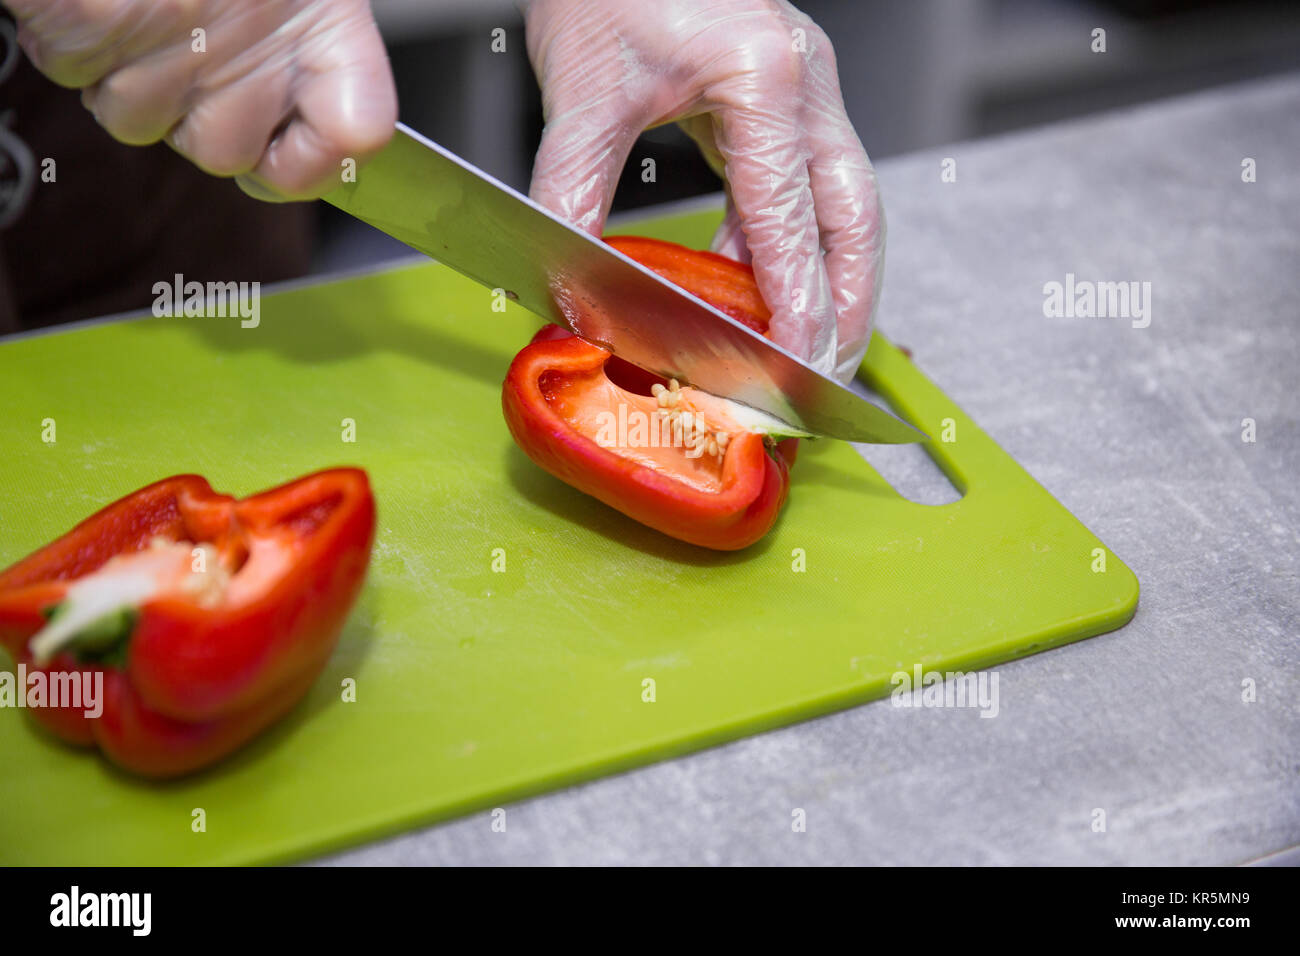 Salad preparation - hands in gloves cutting red pepper into pieces Stock Photo